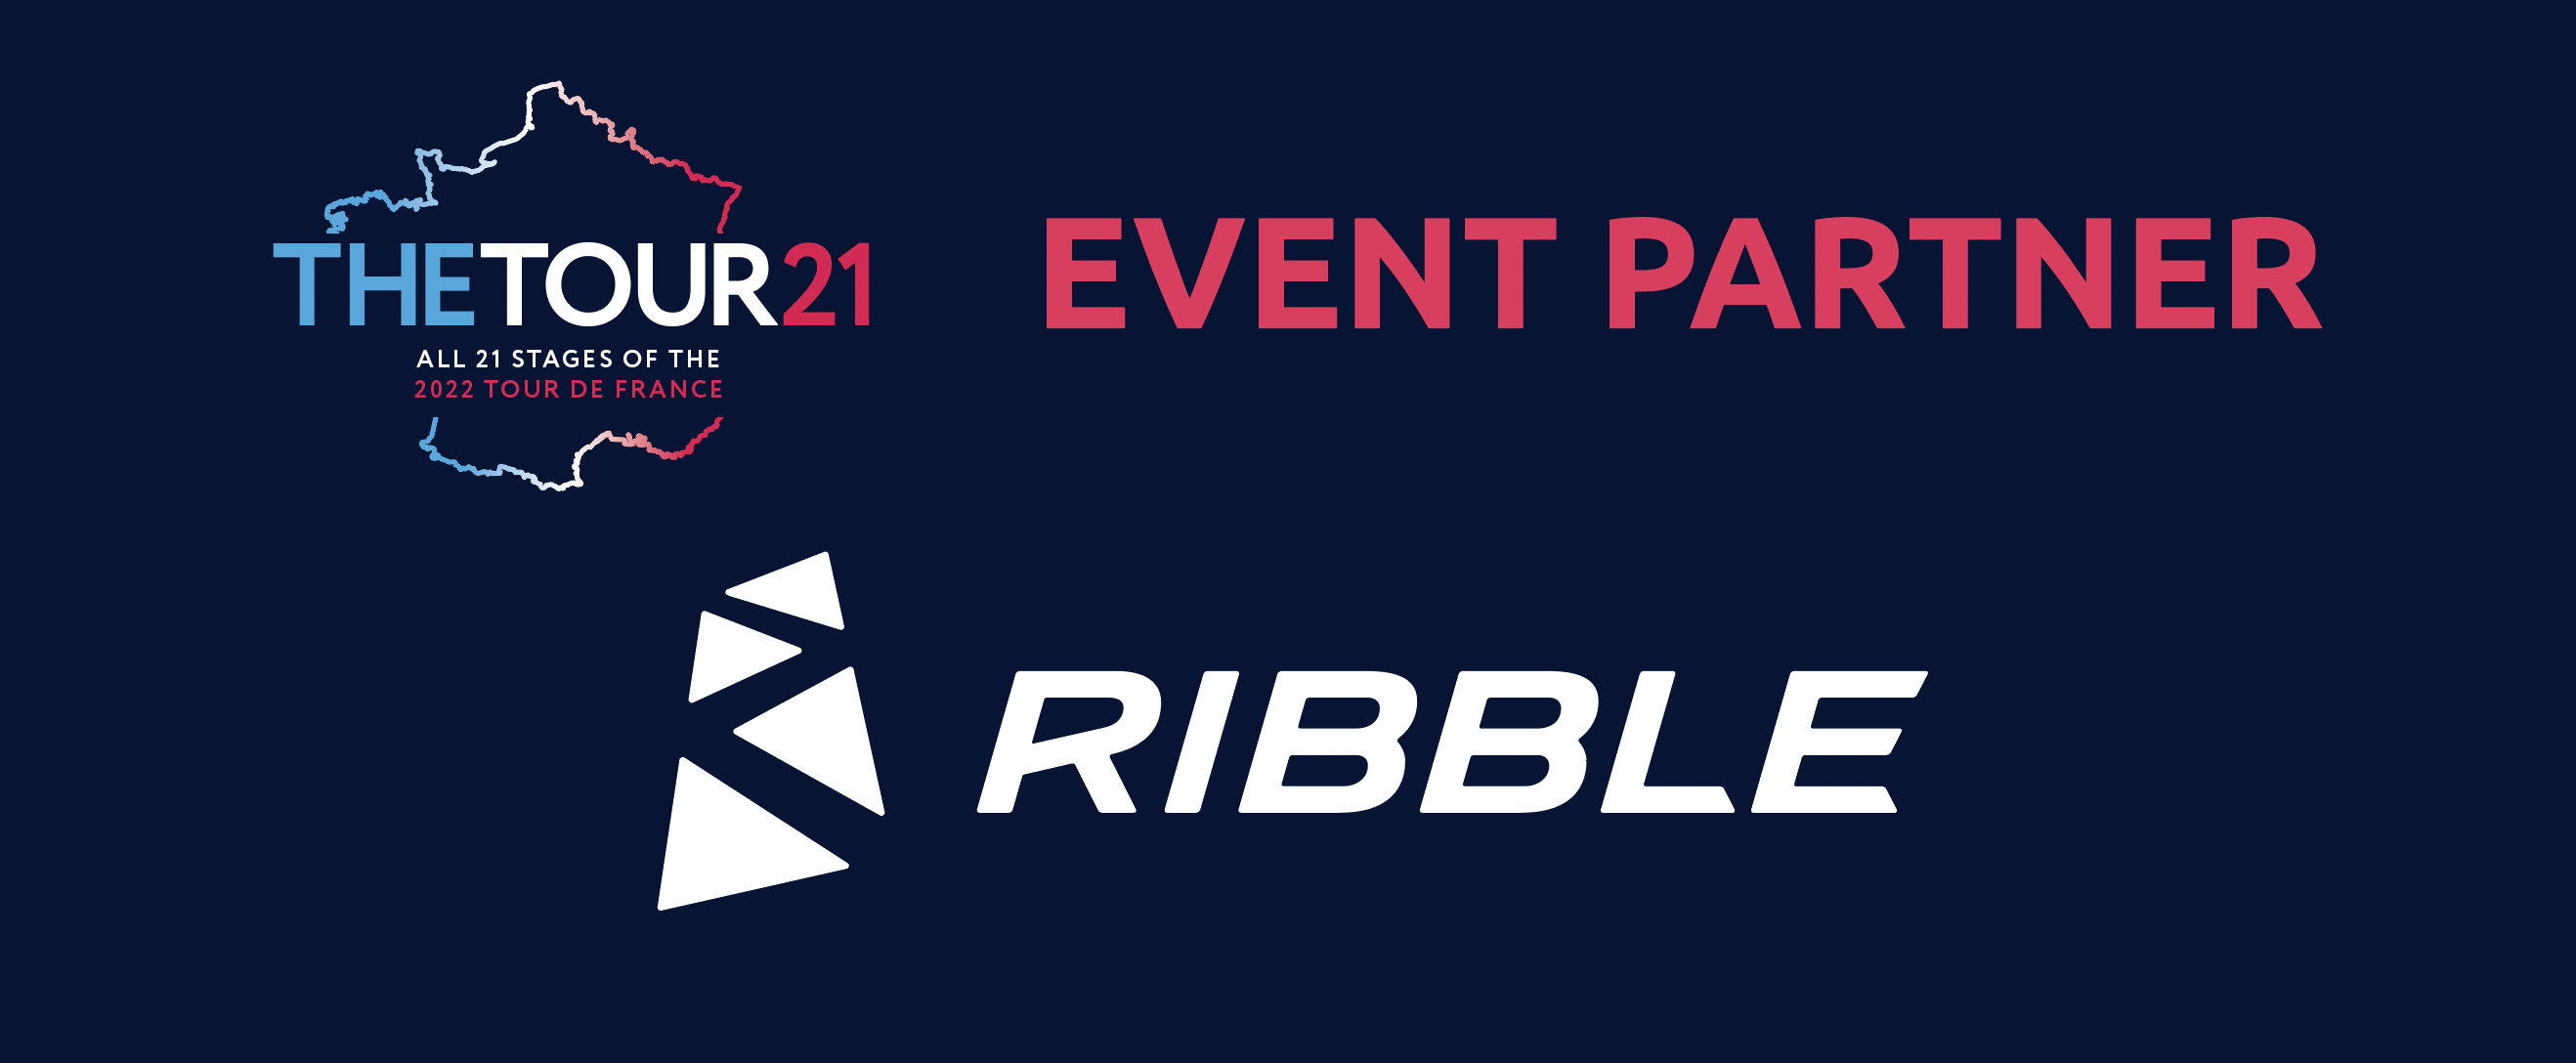 The Tour 21 Confirms Ribble As Official Event Partner For 2022